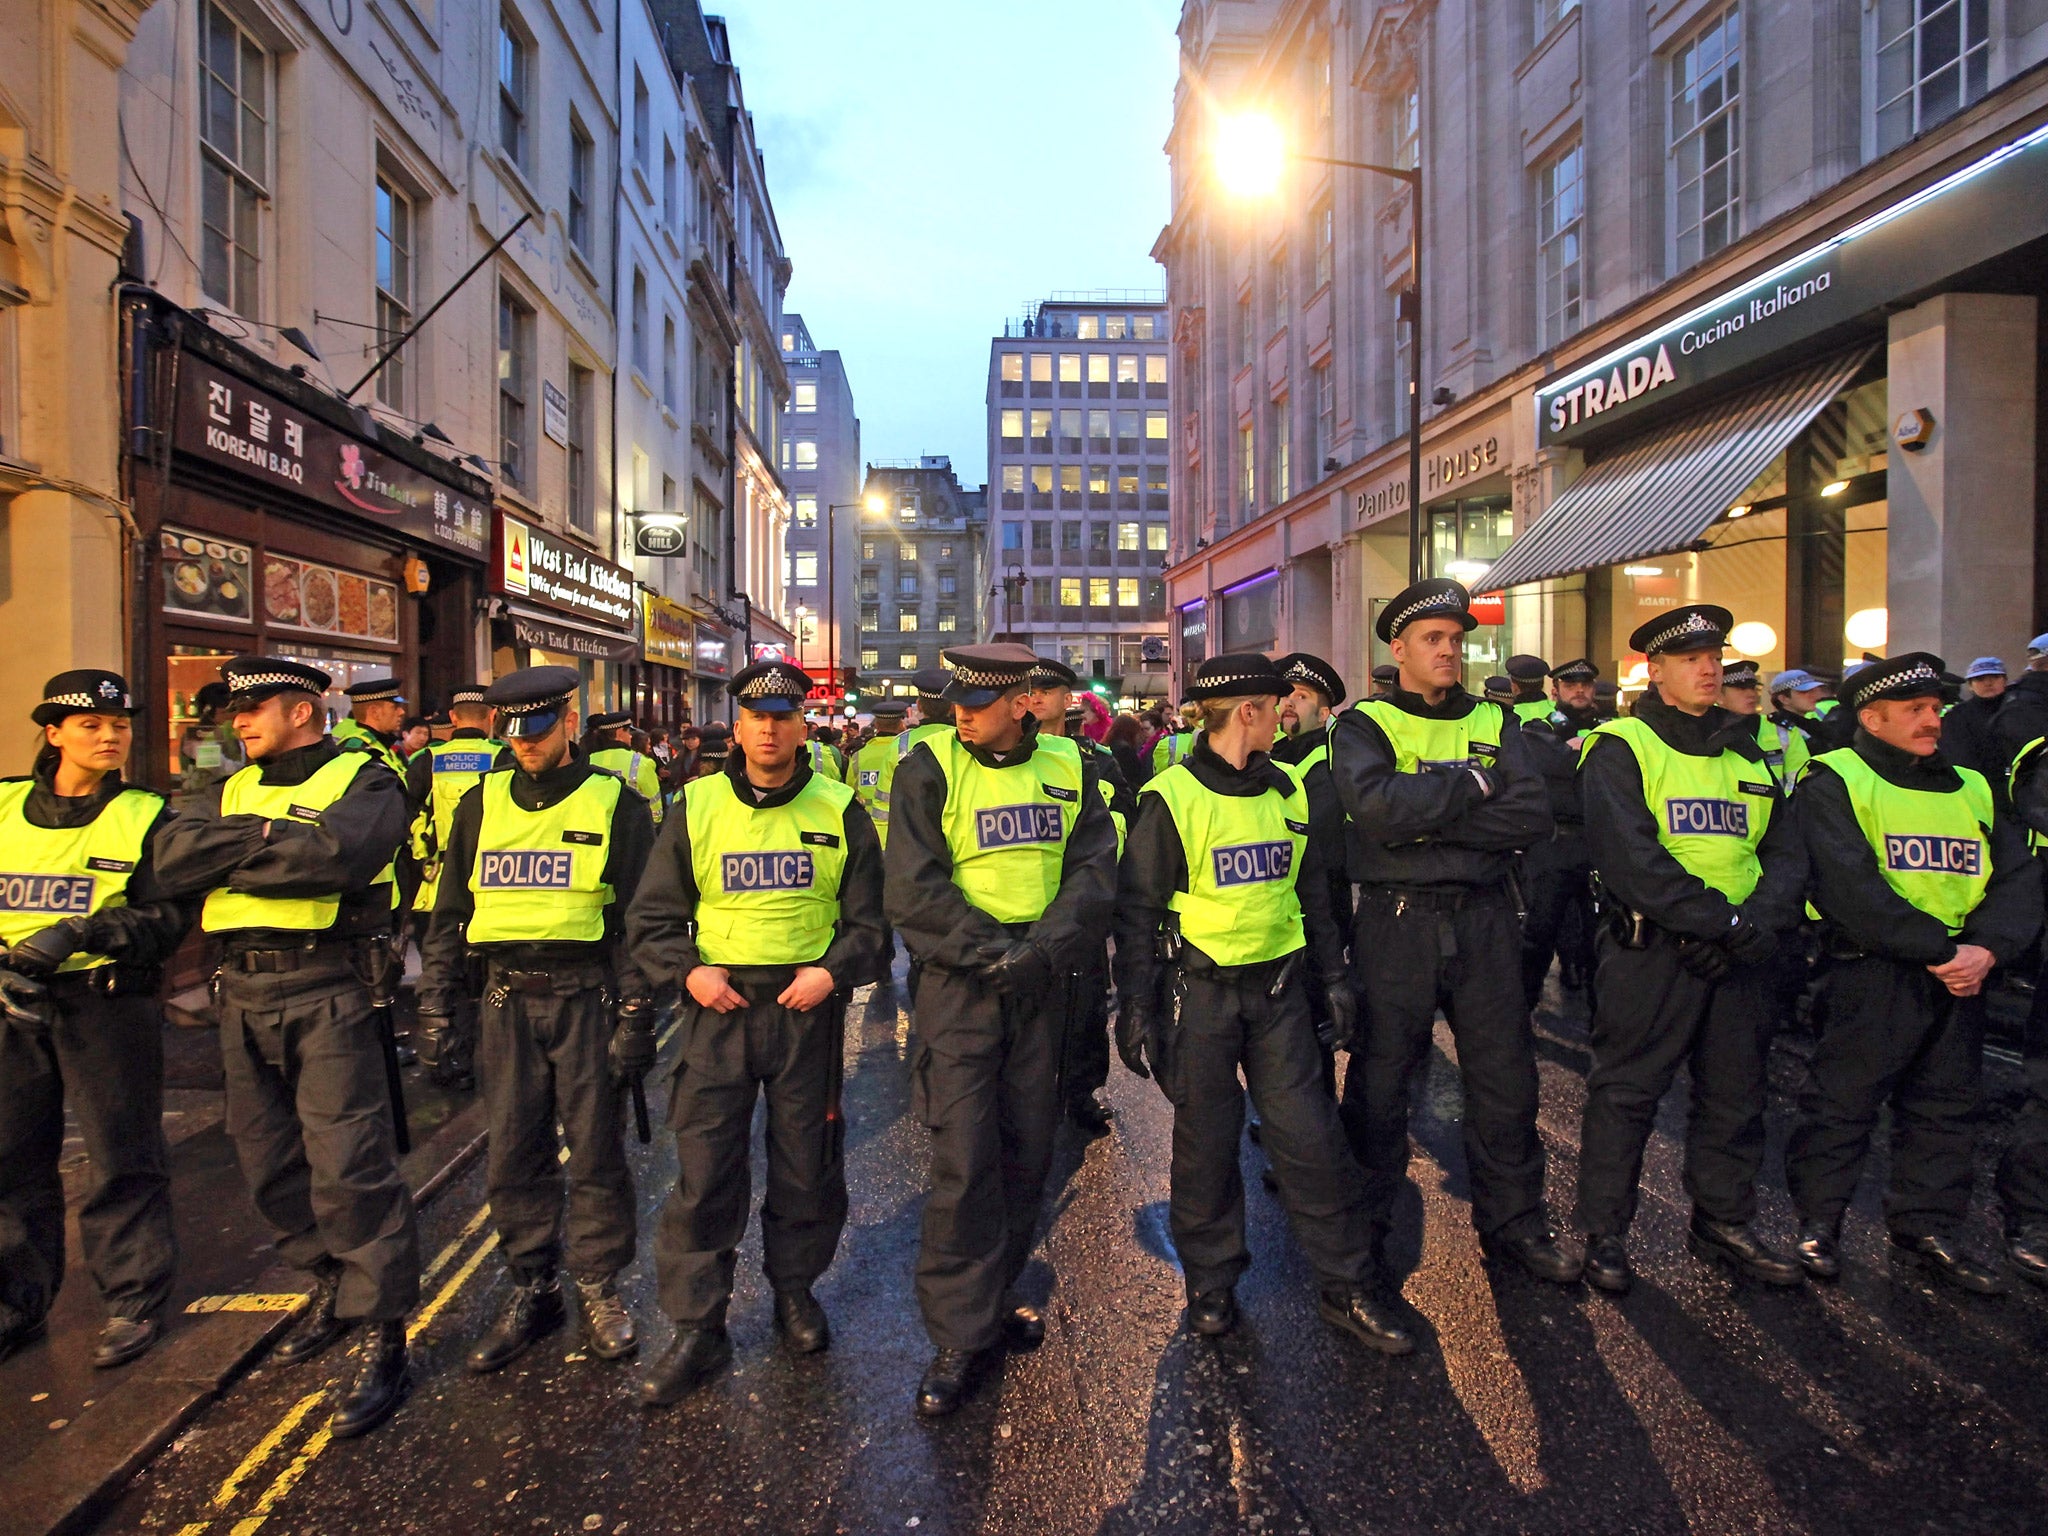 Police block off an area of Panton Street after protesters attempted to occupy a building during protests in November 2011